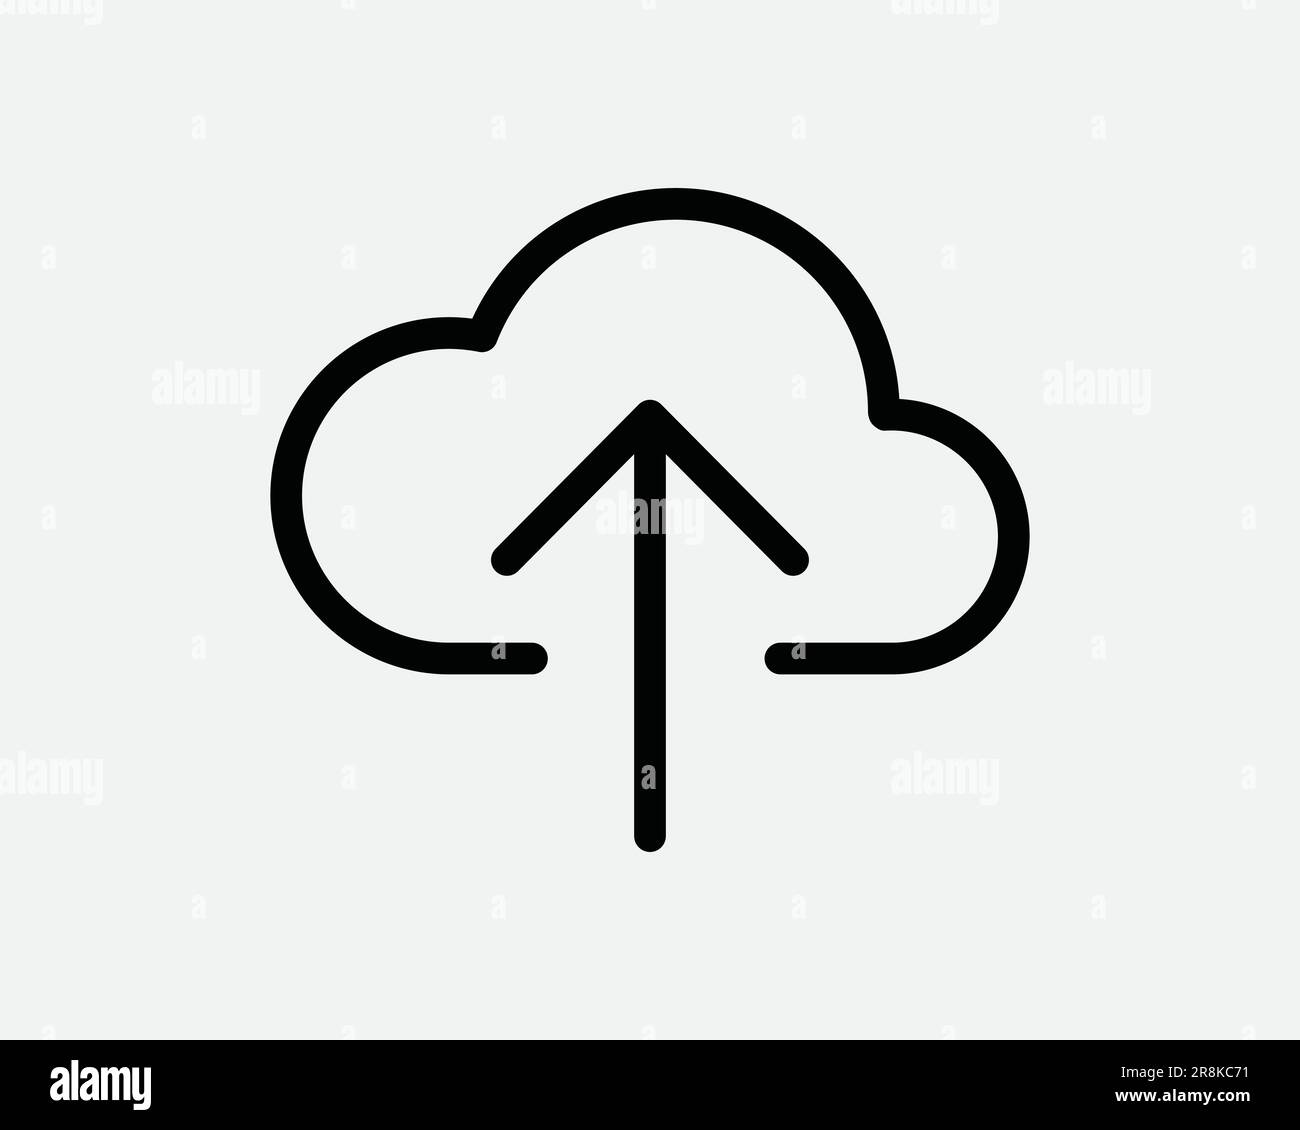 Upload Cloud Icon. Up Arrow Server Storage Data Computer Network Connection. Black White Sign Symbol Illustration Artwork Graphic Clipart EPS Vector Stock Vector